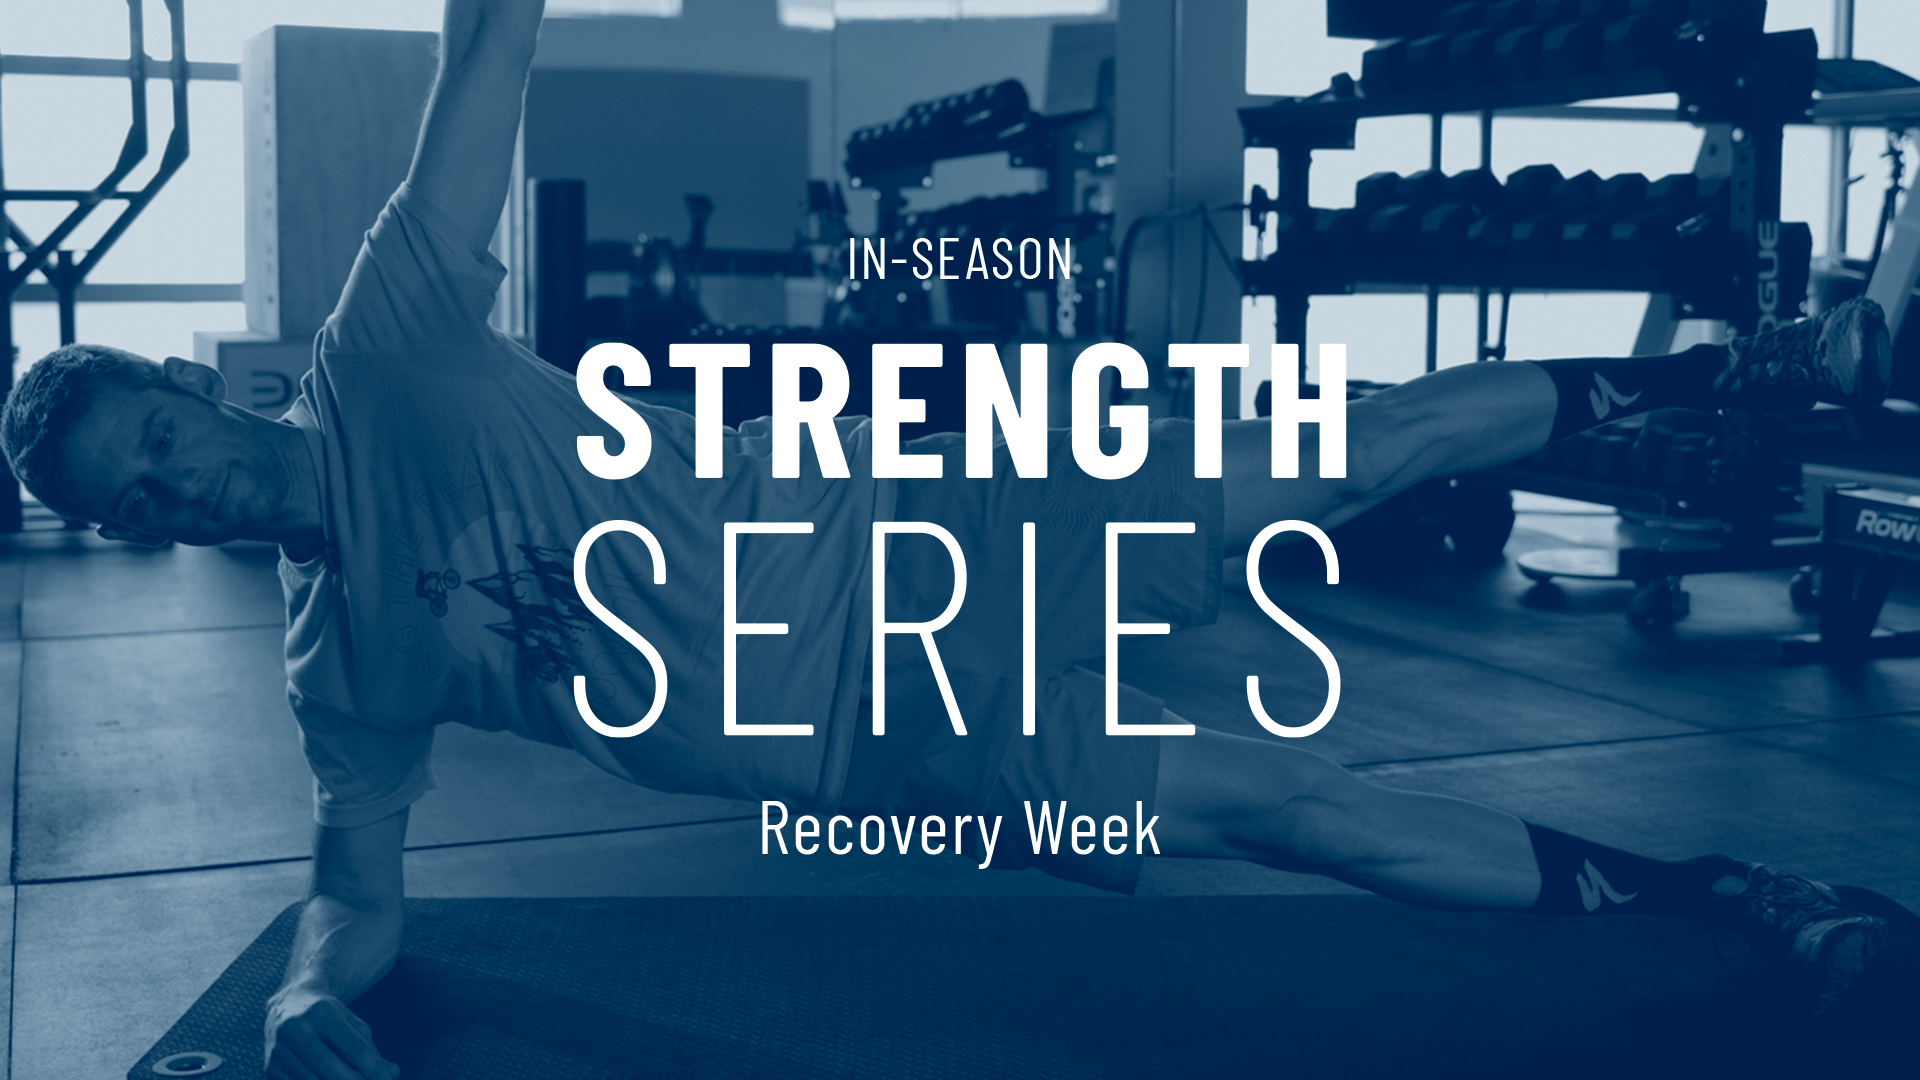 strengths and recovery